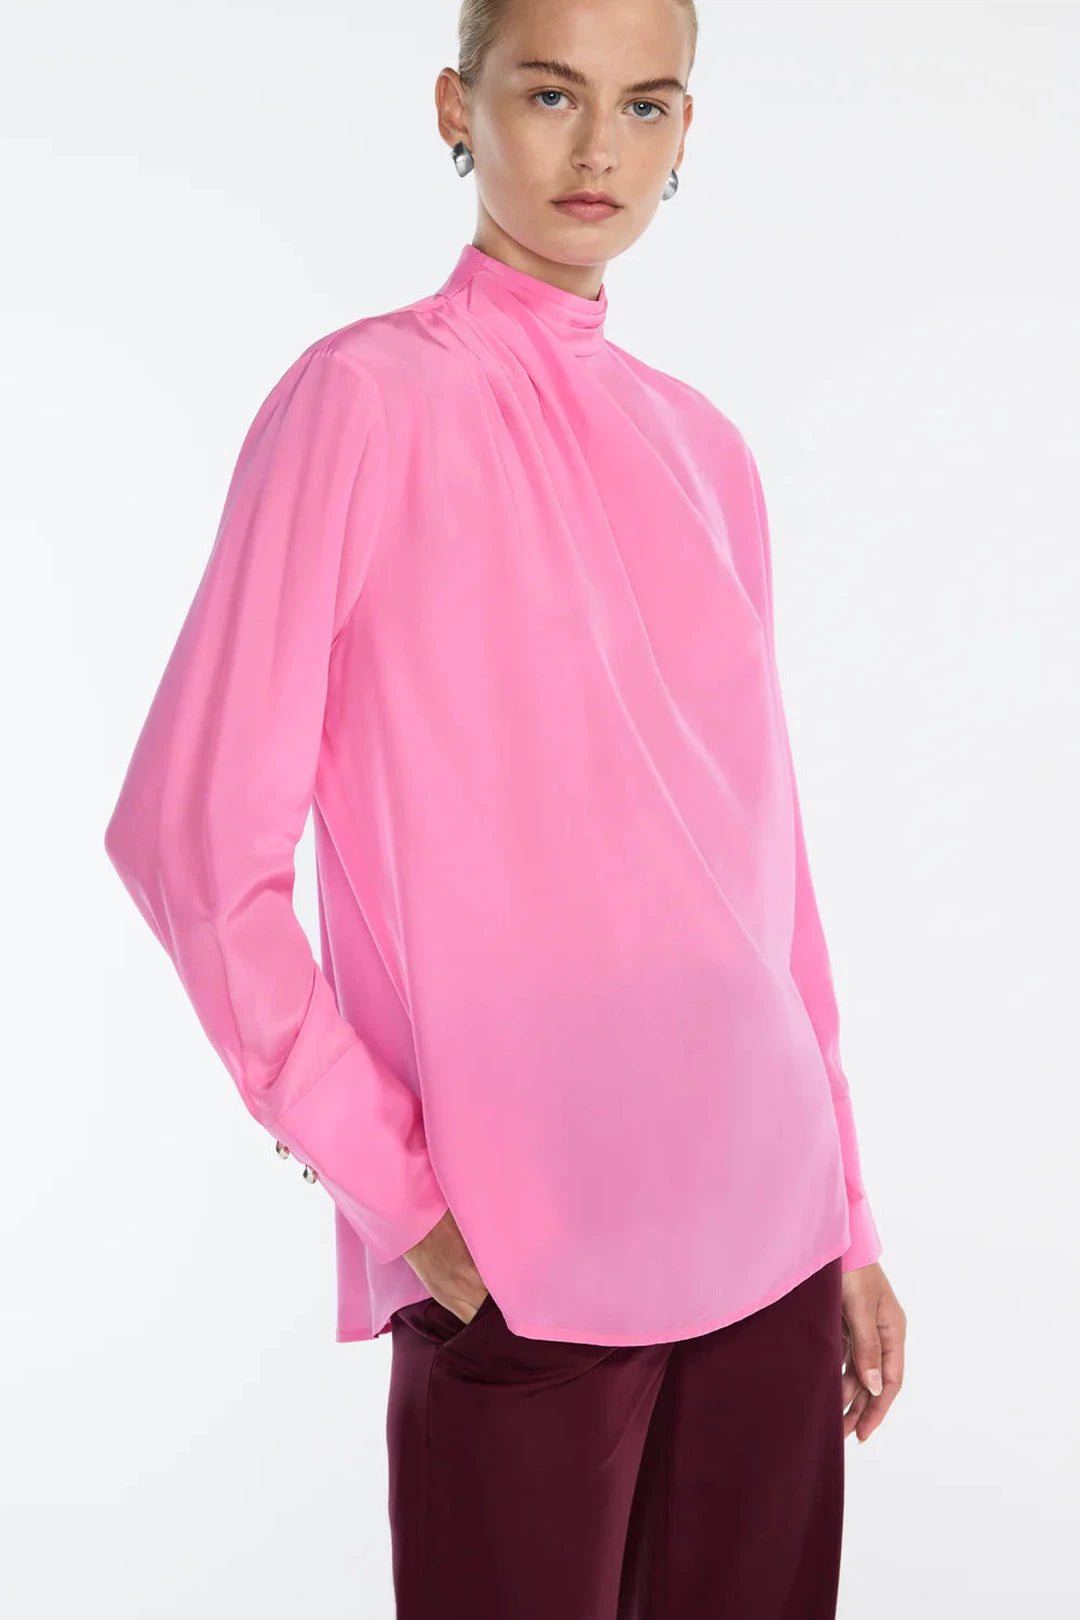 Star power top, pink